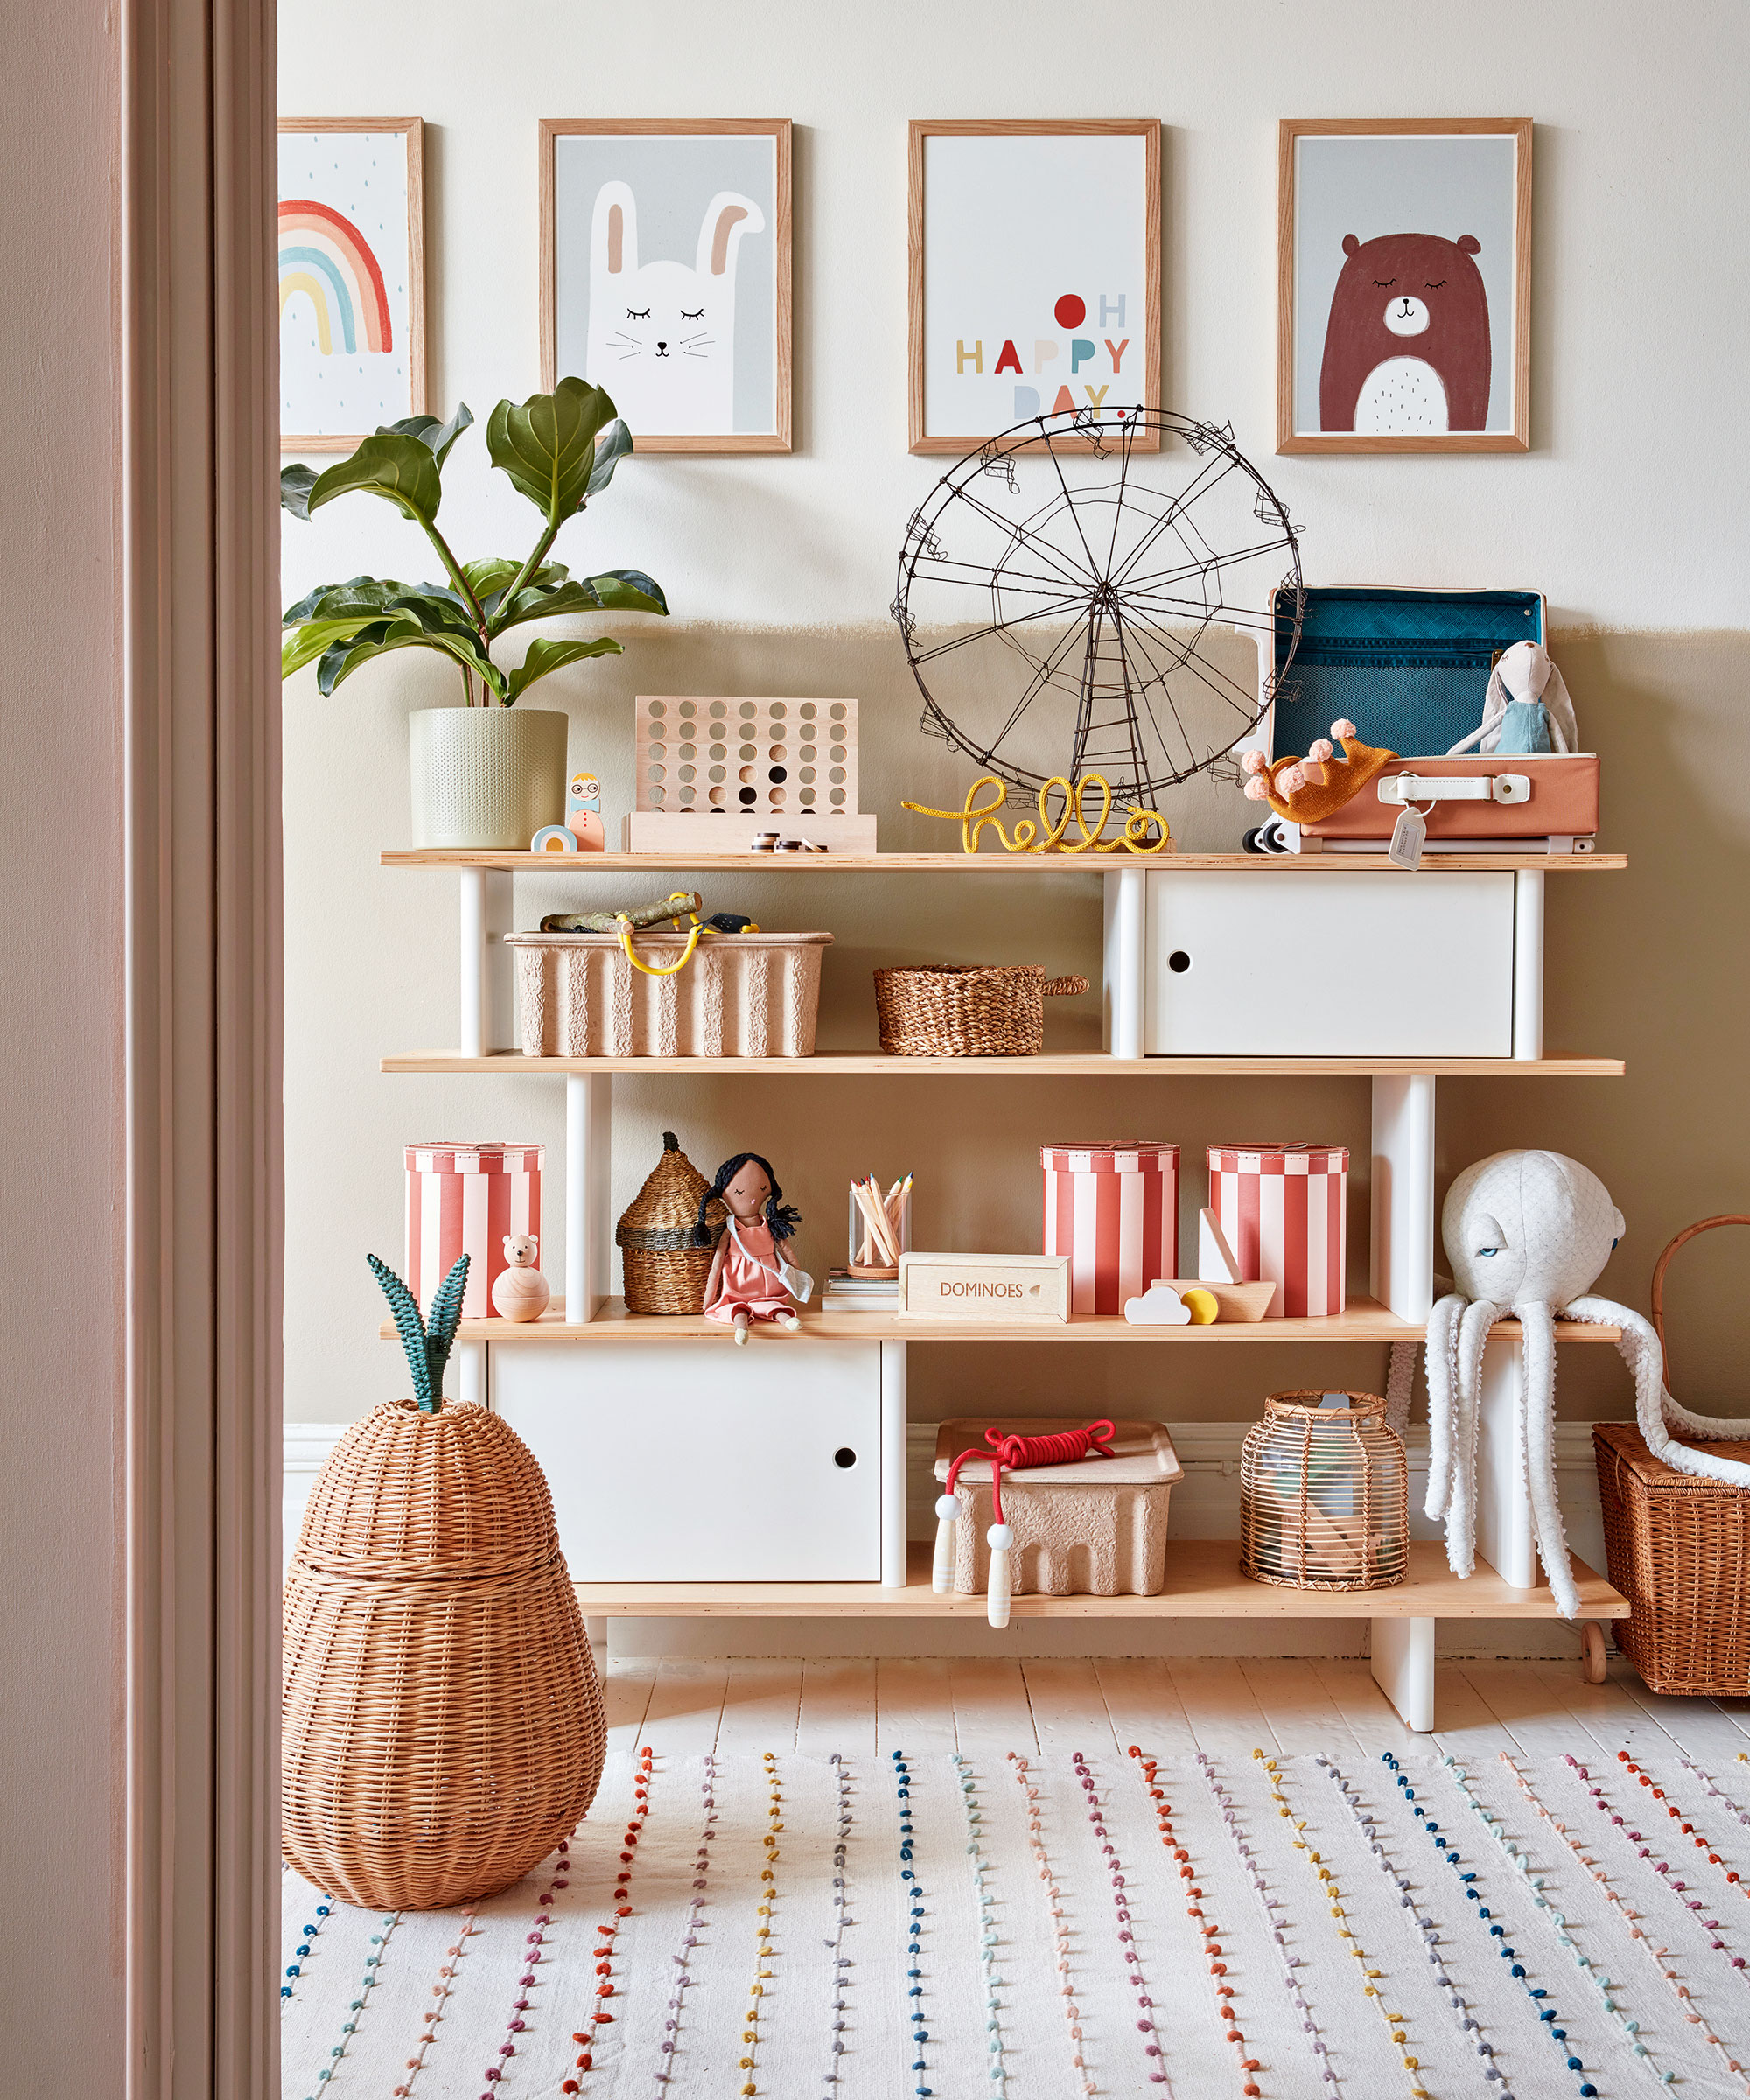 Kids bedroom with open shelving storage with toys and baskets